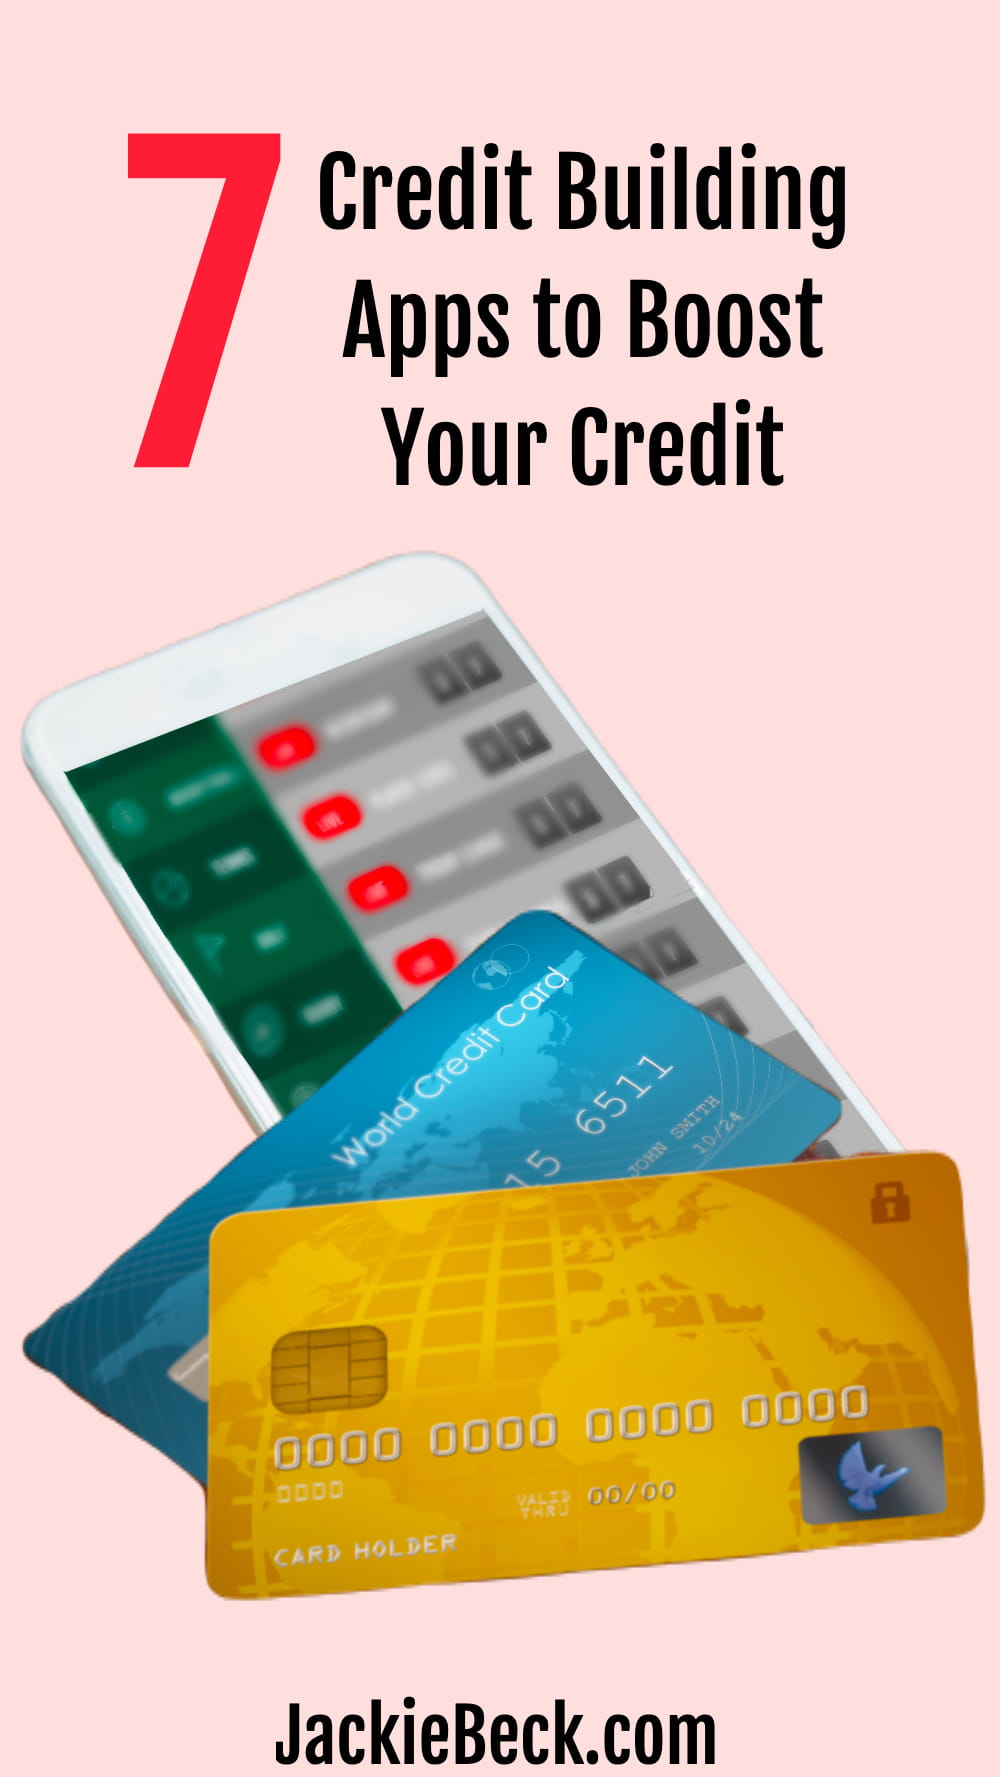 7 credit building apps to boost your credit